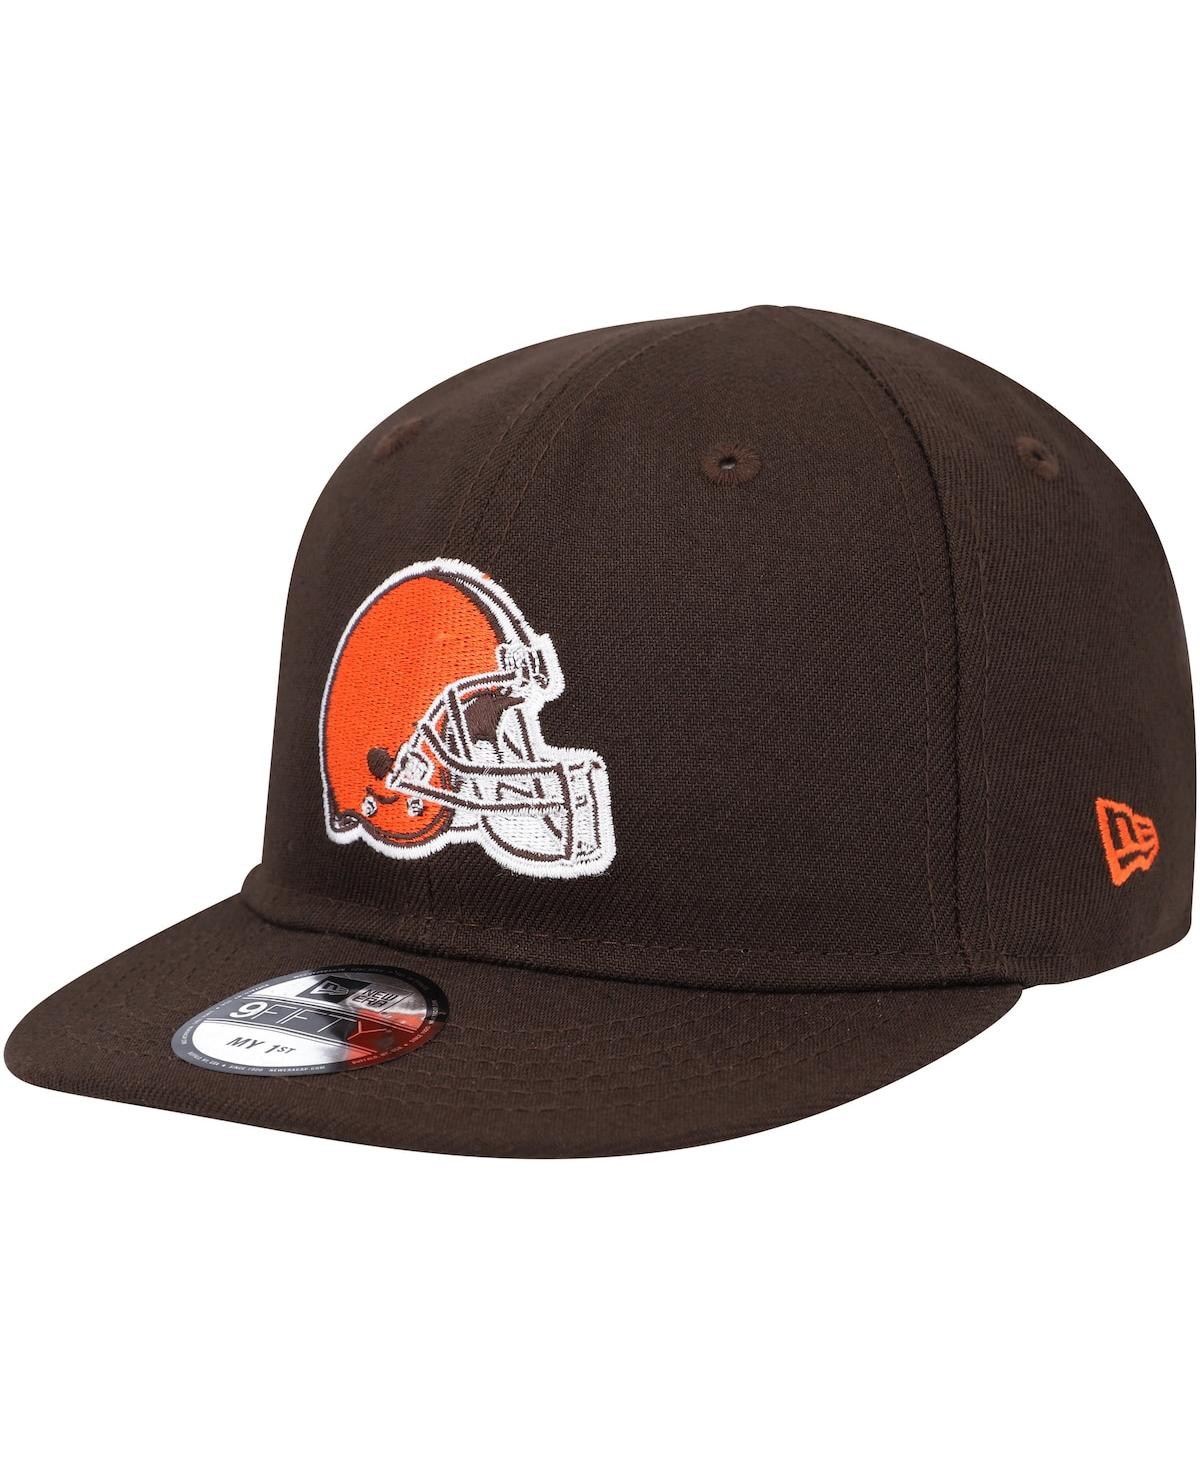 New Era Babies' Infant Boys And Girls  Brown Cleveland Browns My 1st 9fifty Snapback Hat